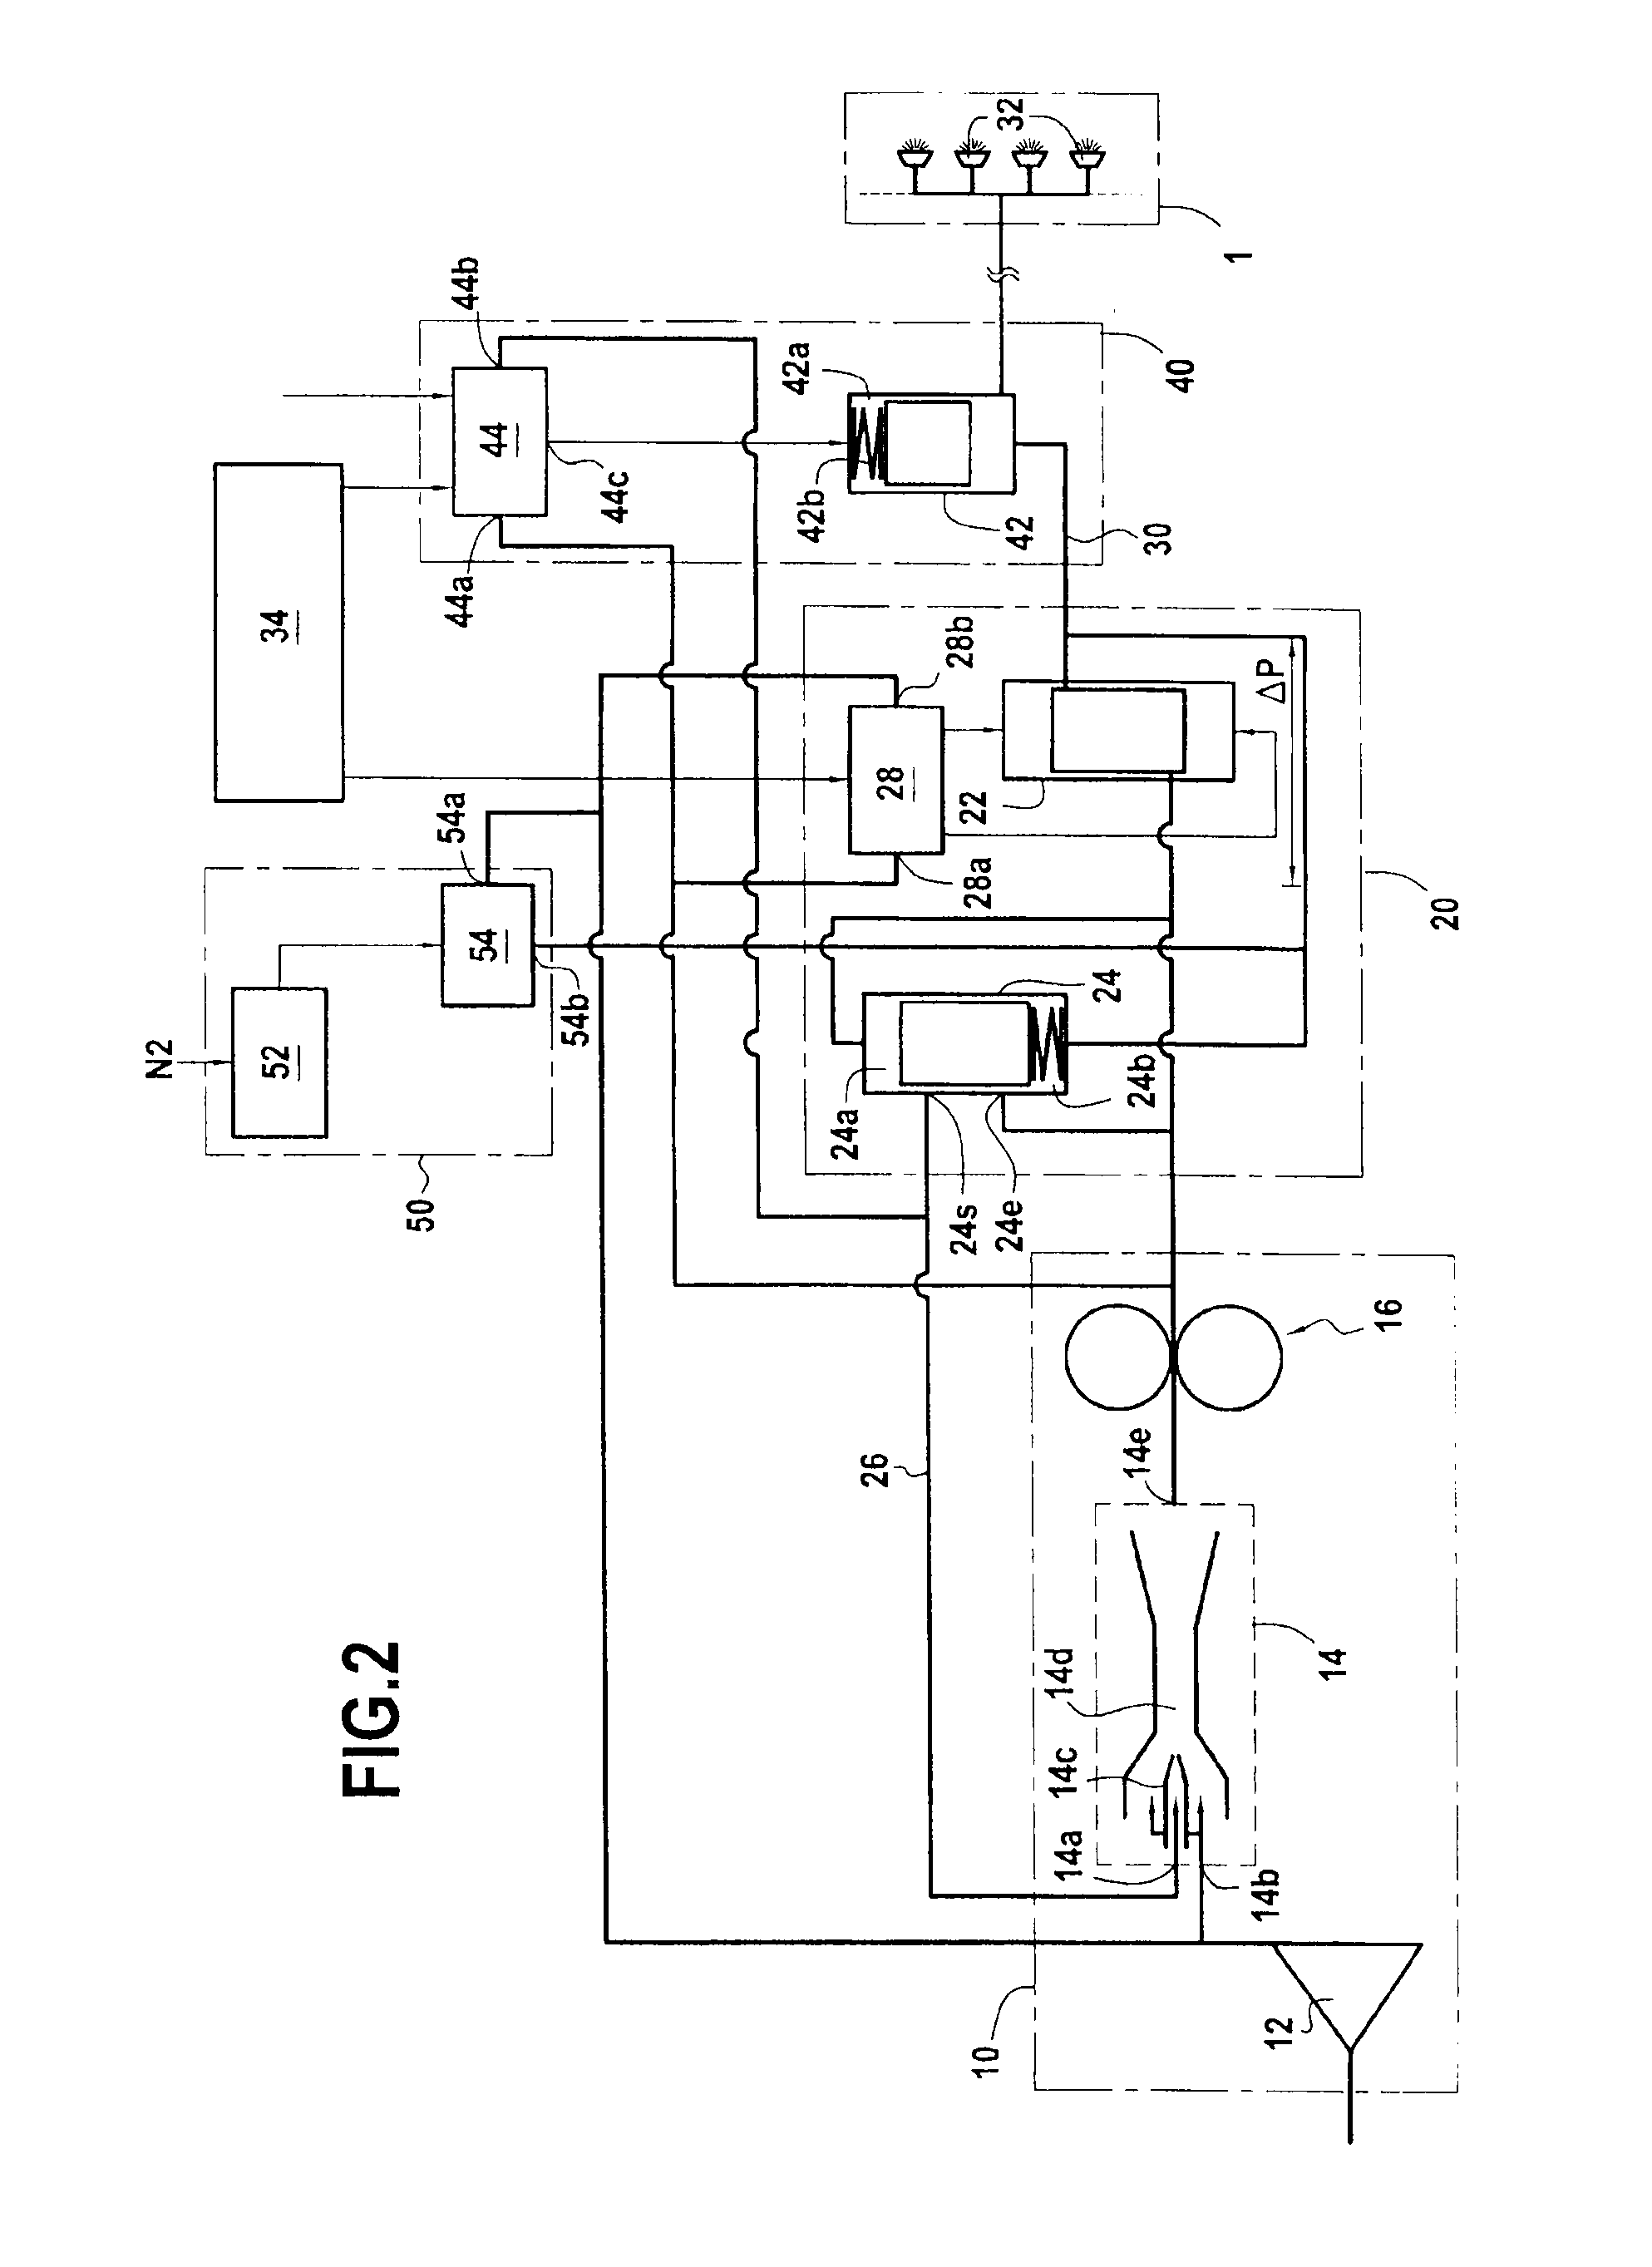 Fuel feed device for aviation engine